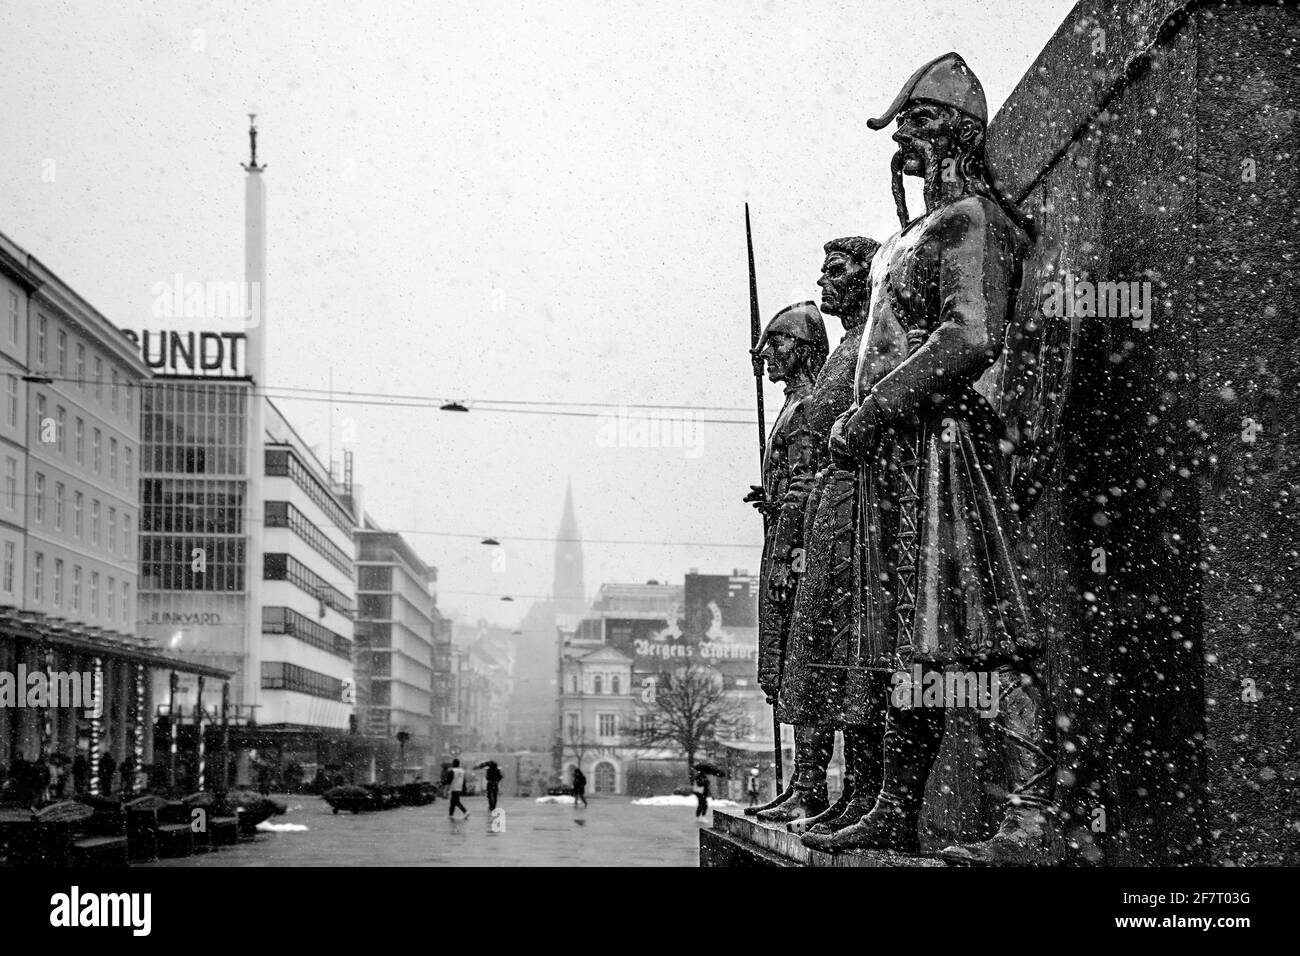 Snowy weather over three of the statues at Sailor's Monument at Torgalmenningen square in downtown Bergen, Norway. Stock Photo